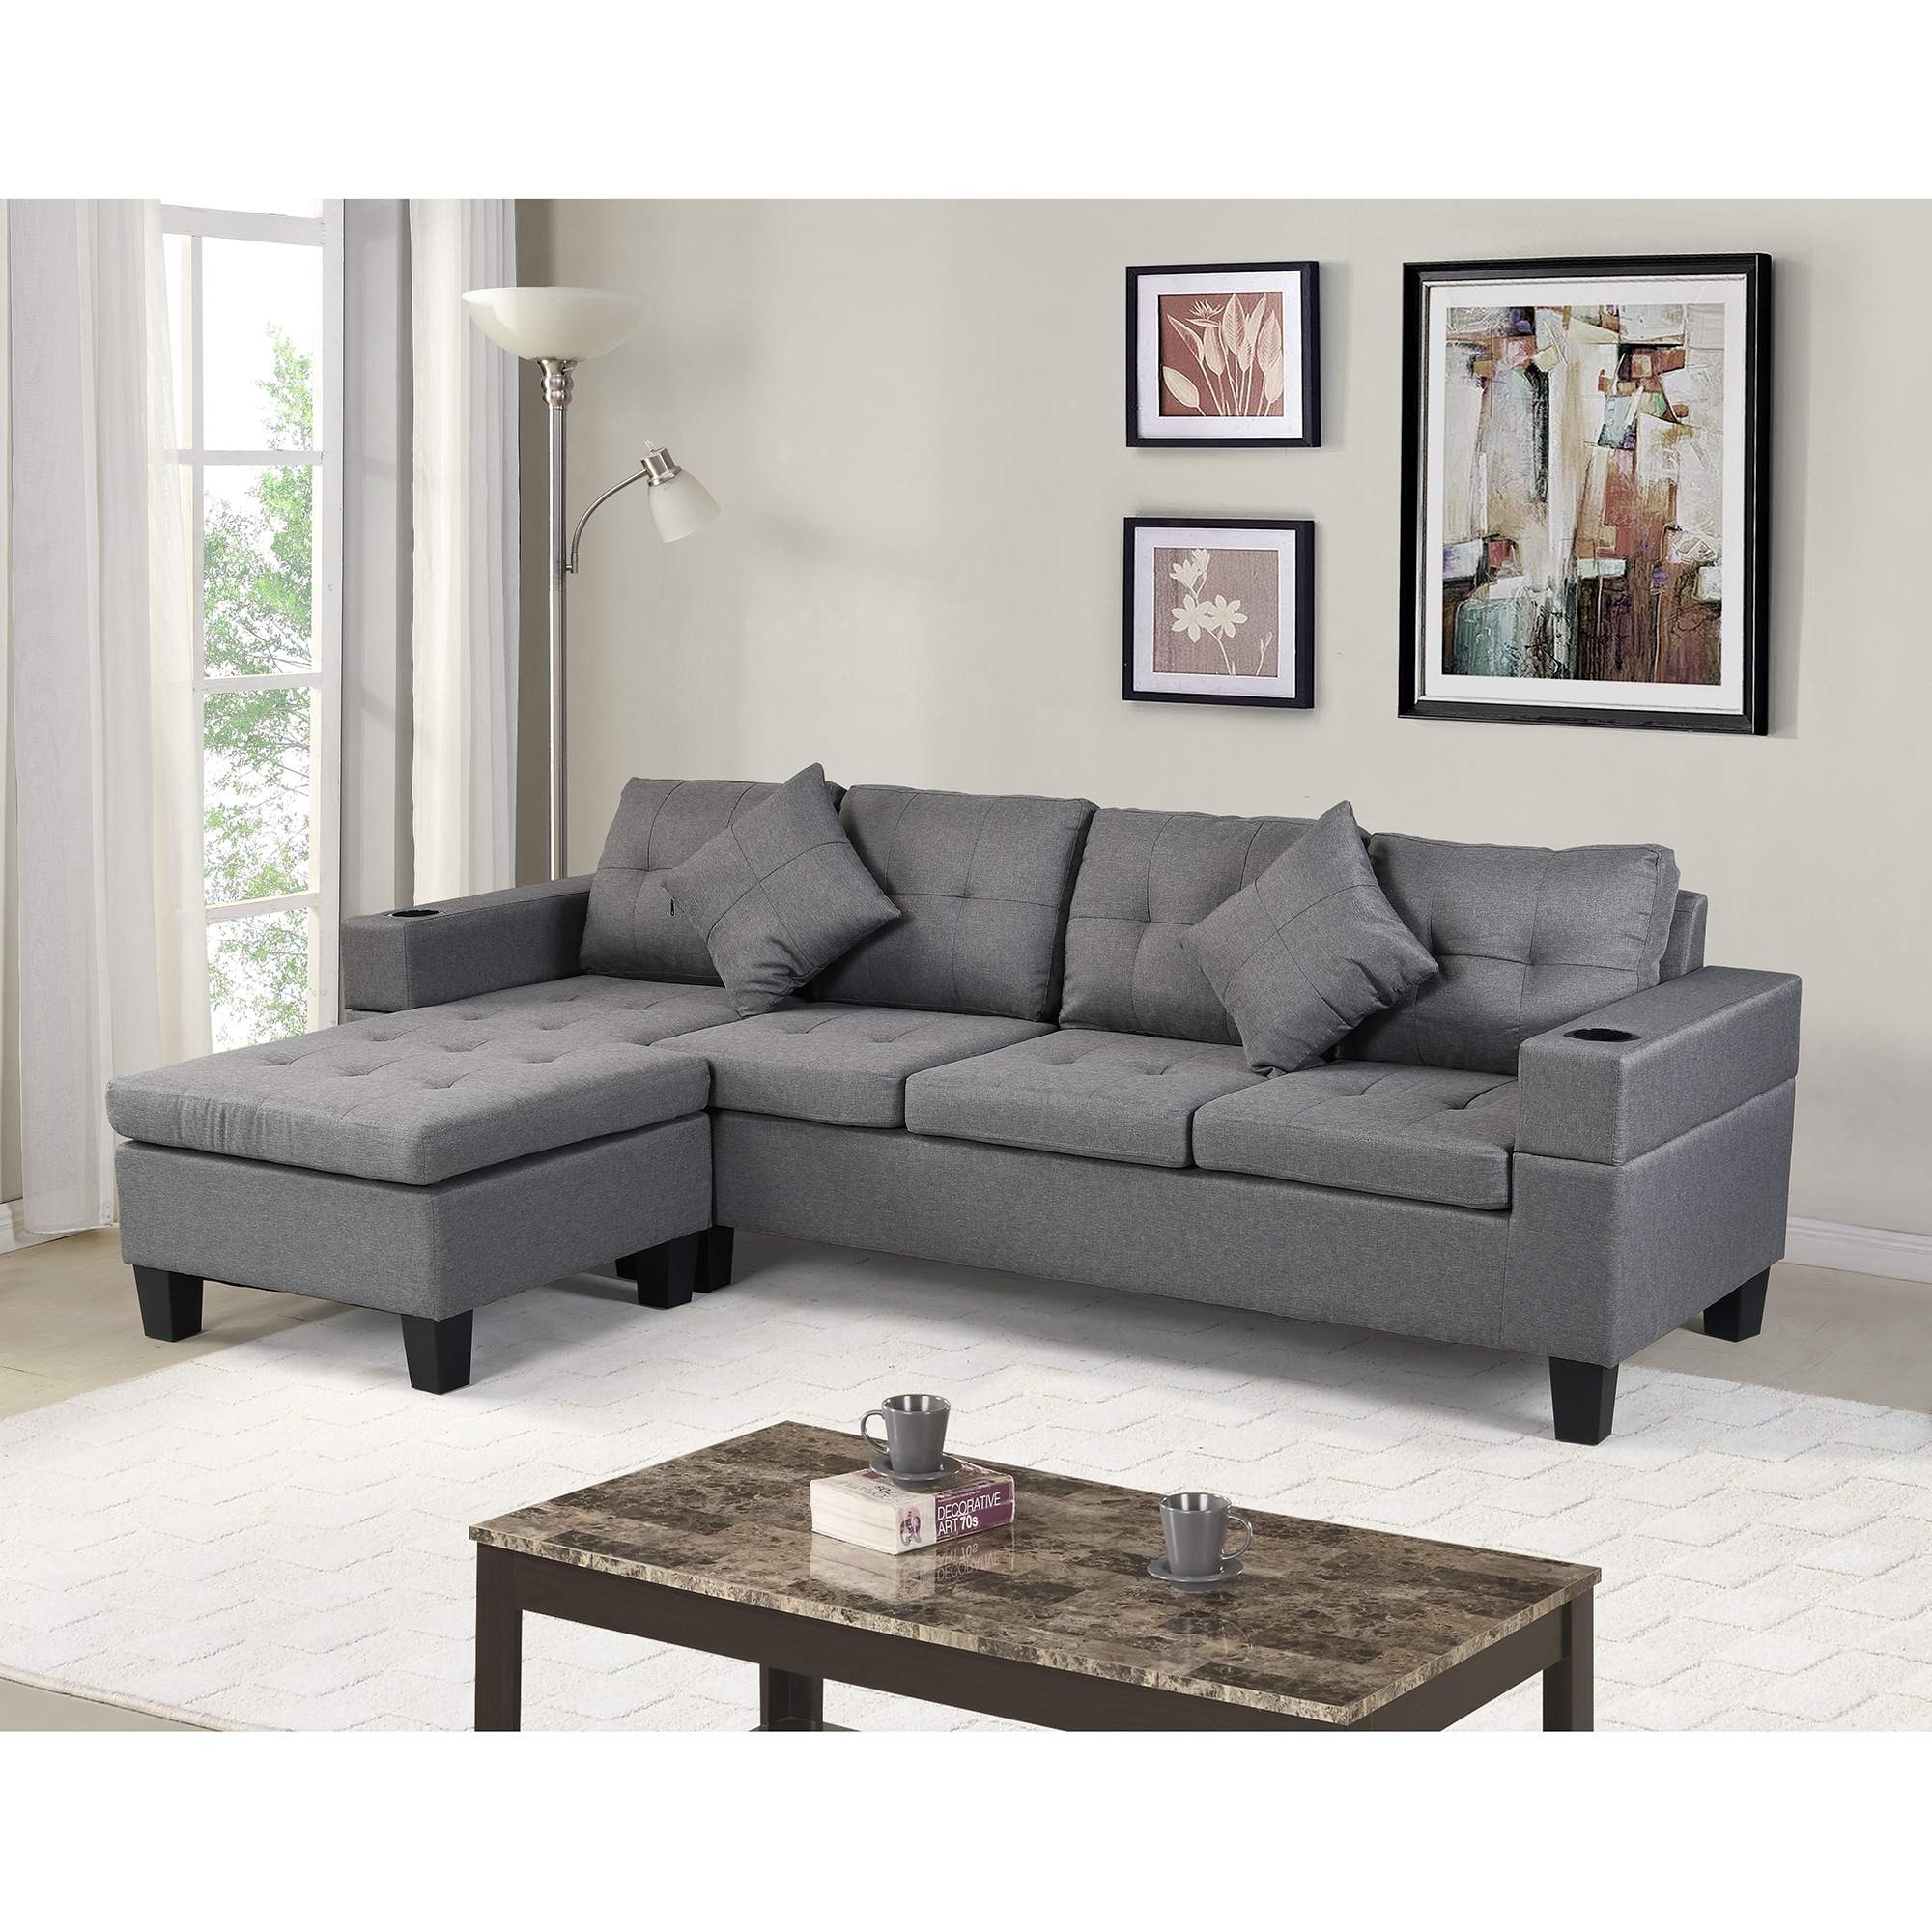 Sectional Sofa Set For Living Room With L Shape Chaise Lounge  cup Holder And Left Or Right Hand Chaise Modern 4 Seat